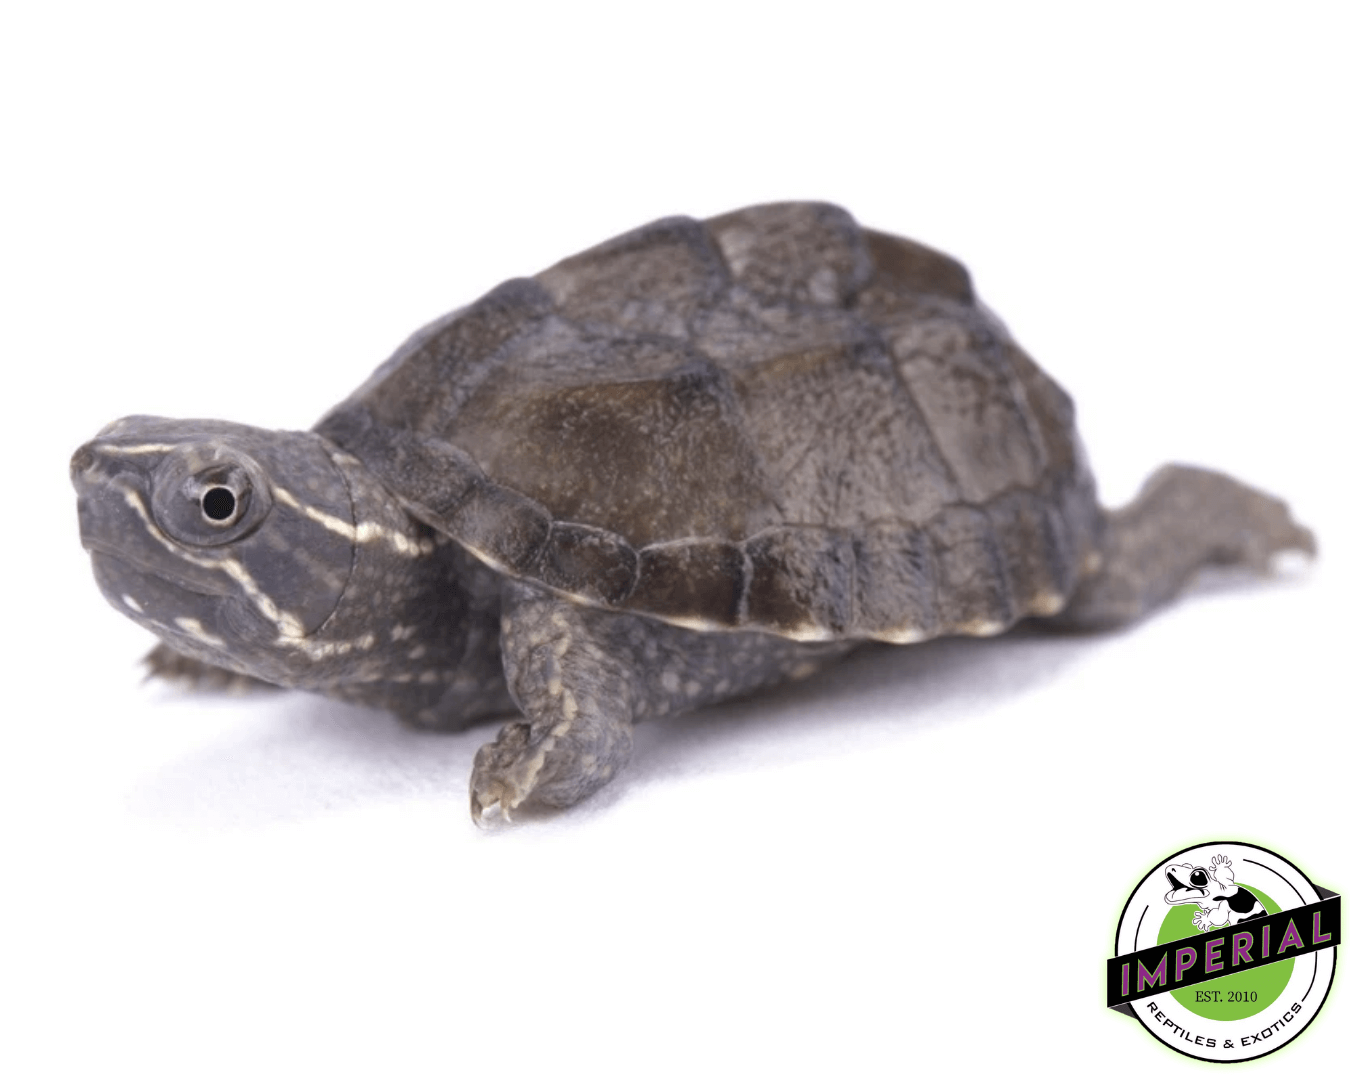 musk turtle for sale, buy reptiles online